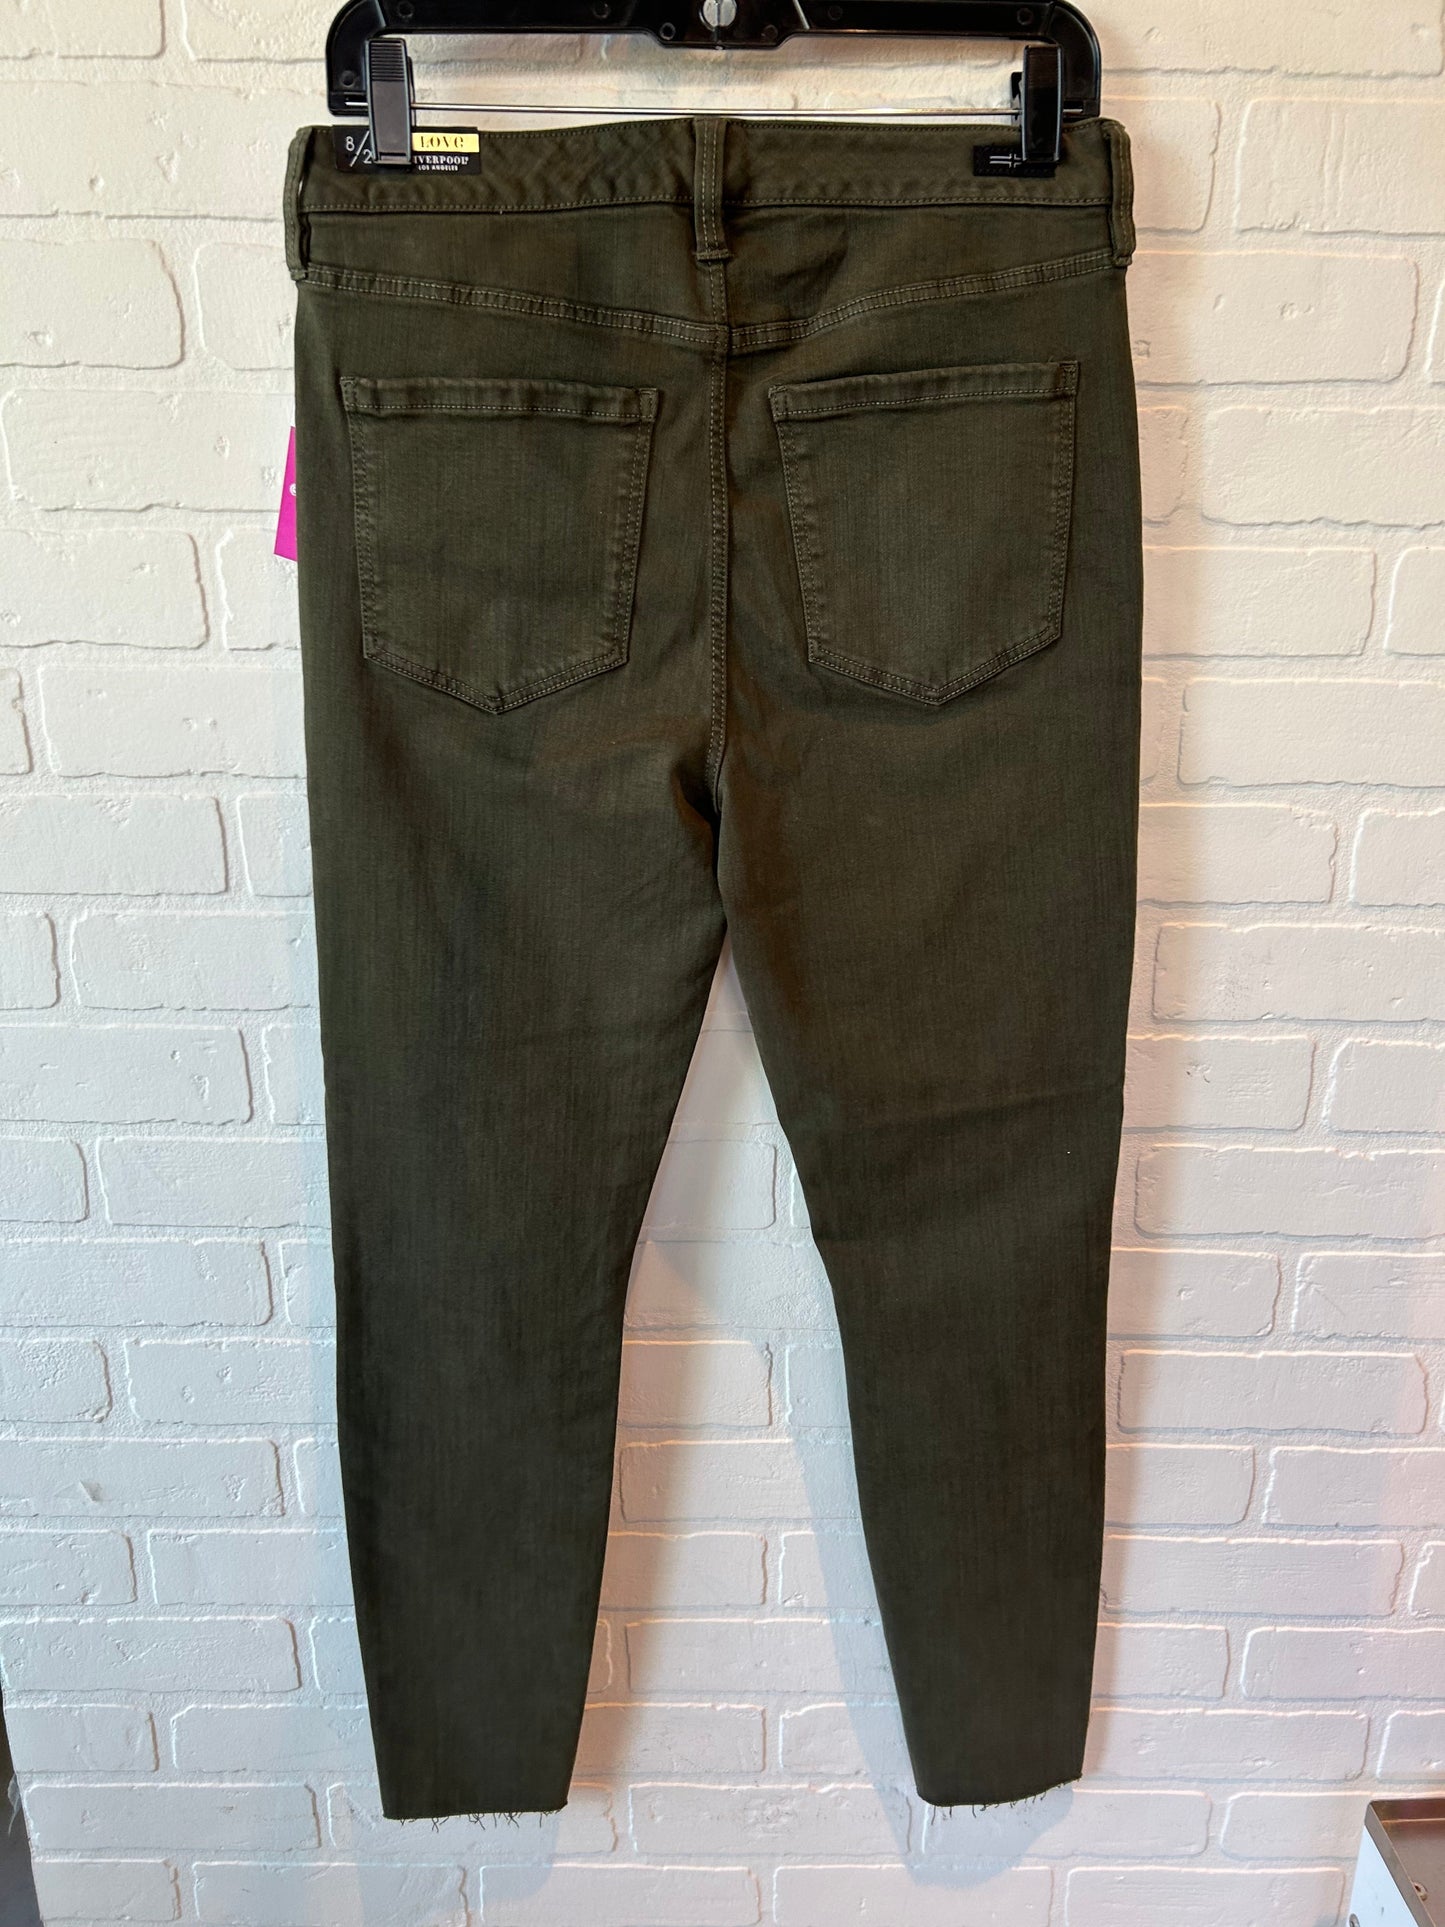 Green Pants Other Liverpool, Size 8